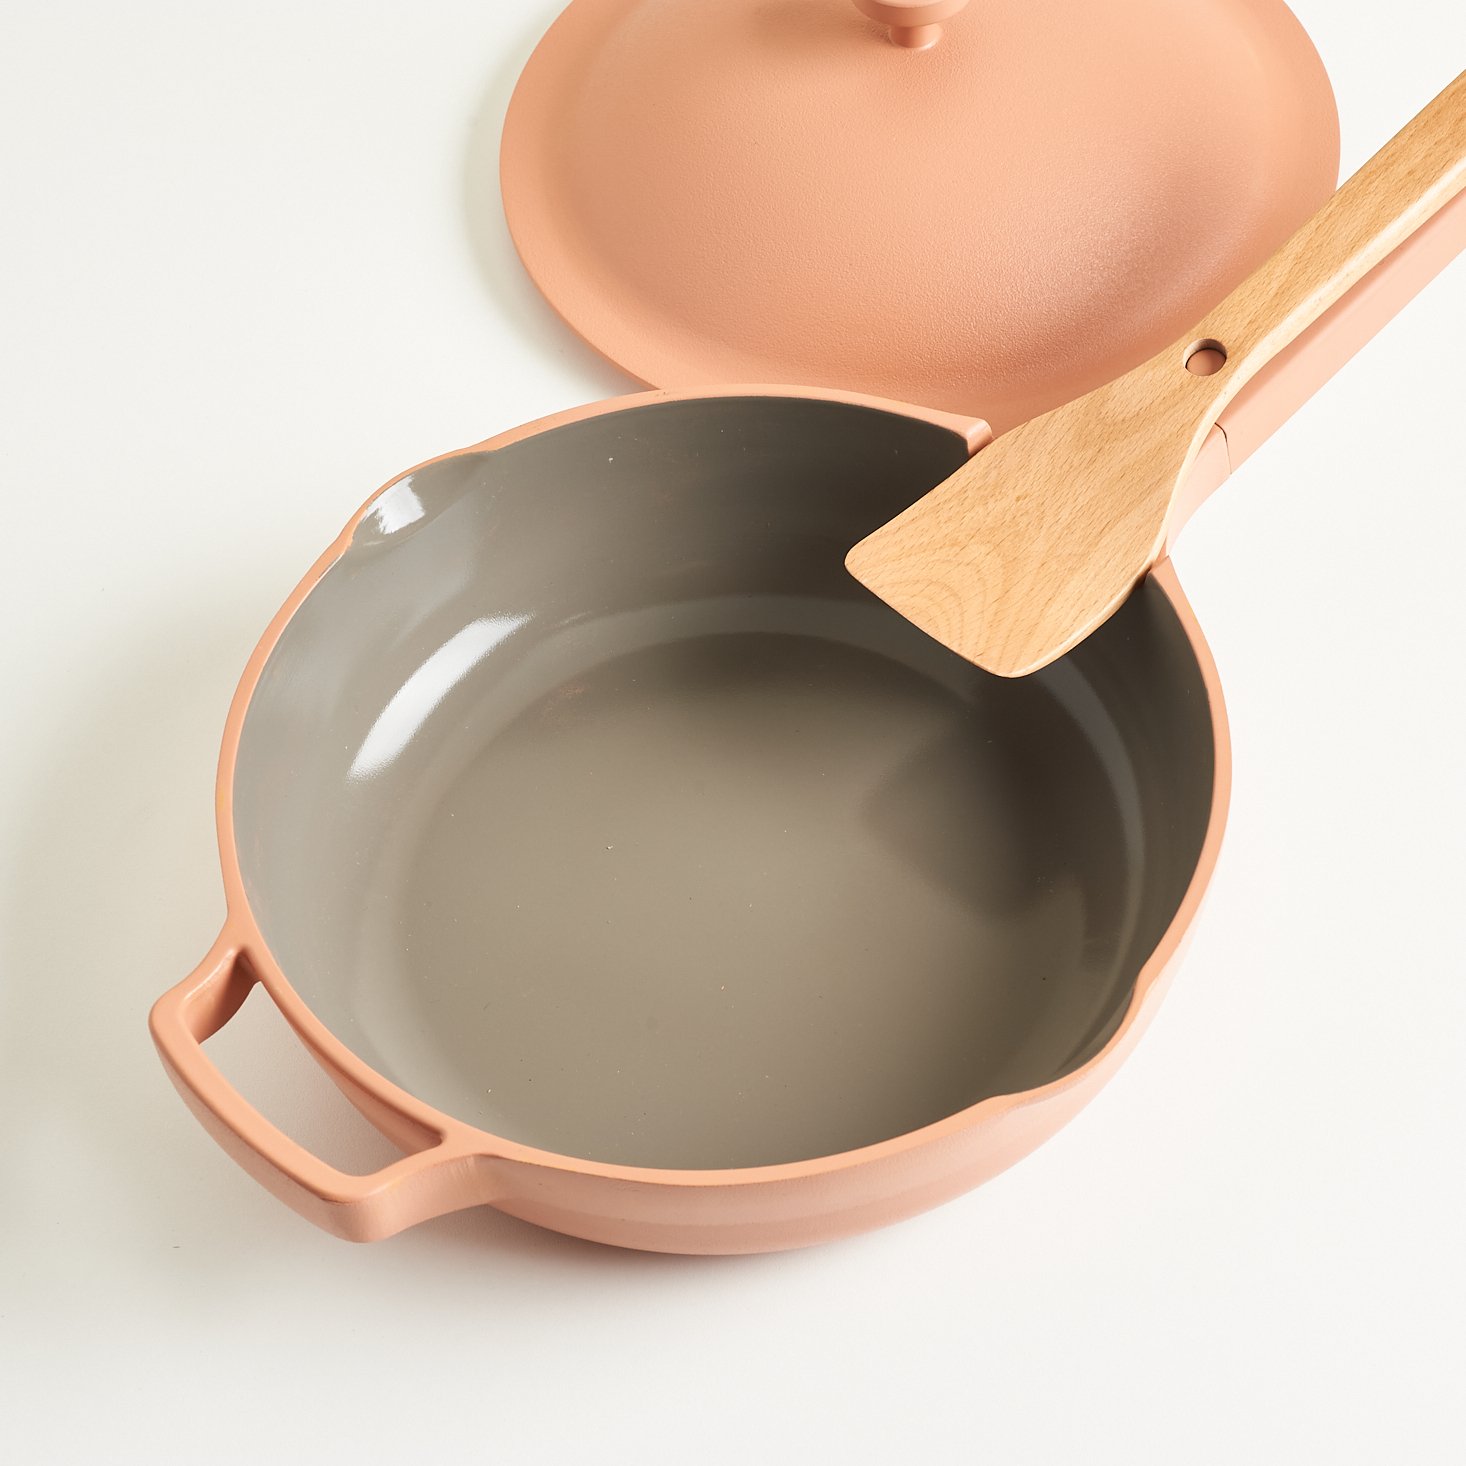 Our Place Review: Non-Stick Always Pan - Is it Worth it? - Schimiggy